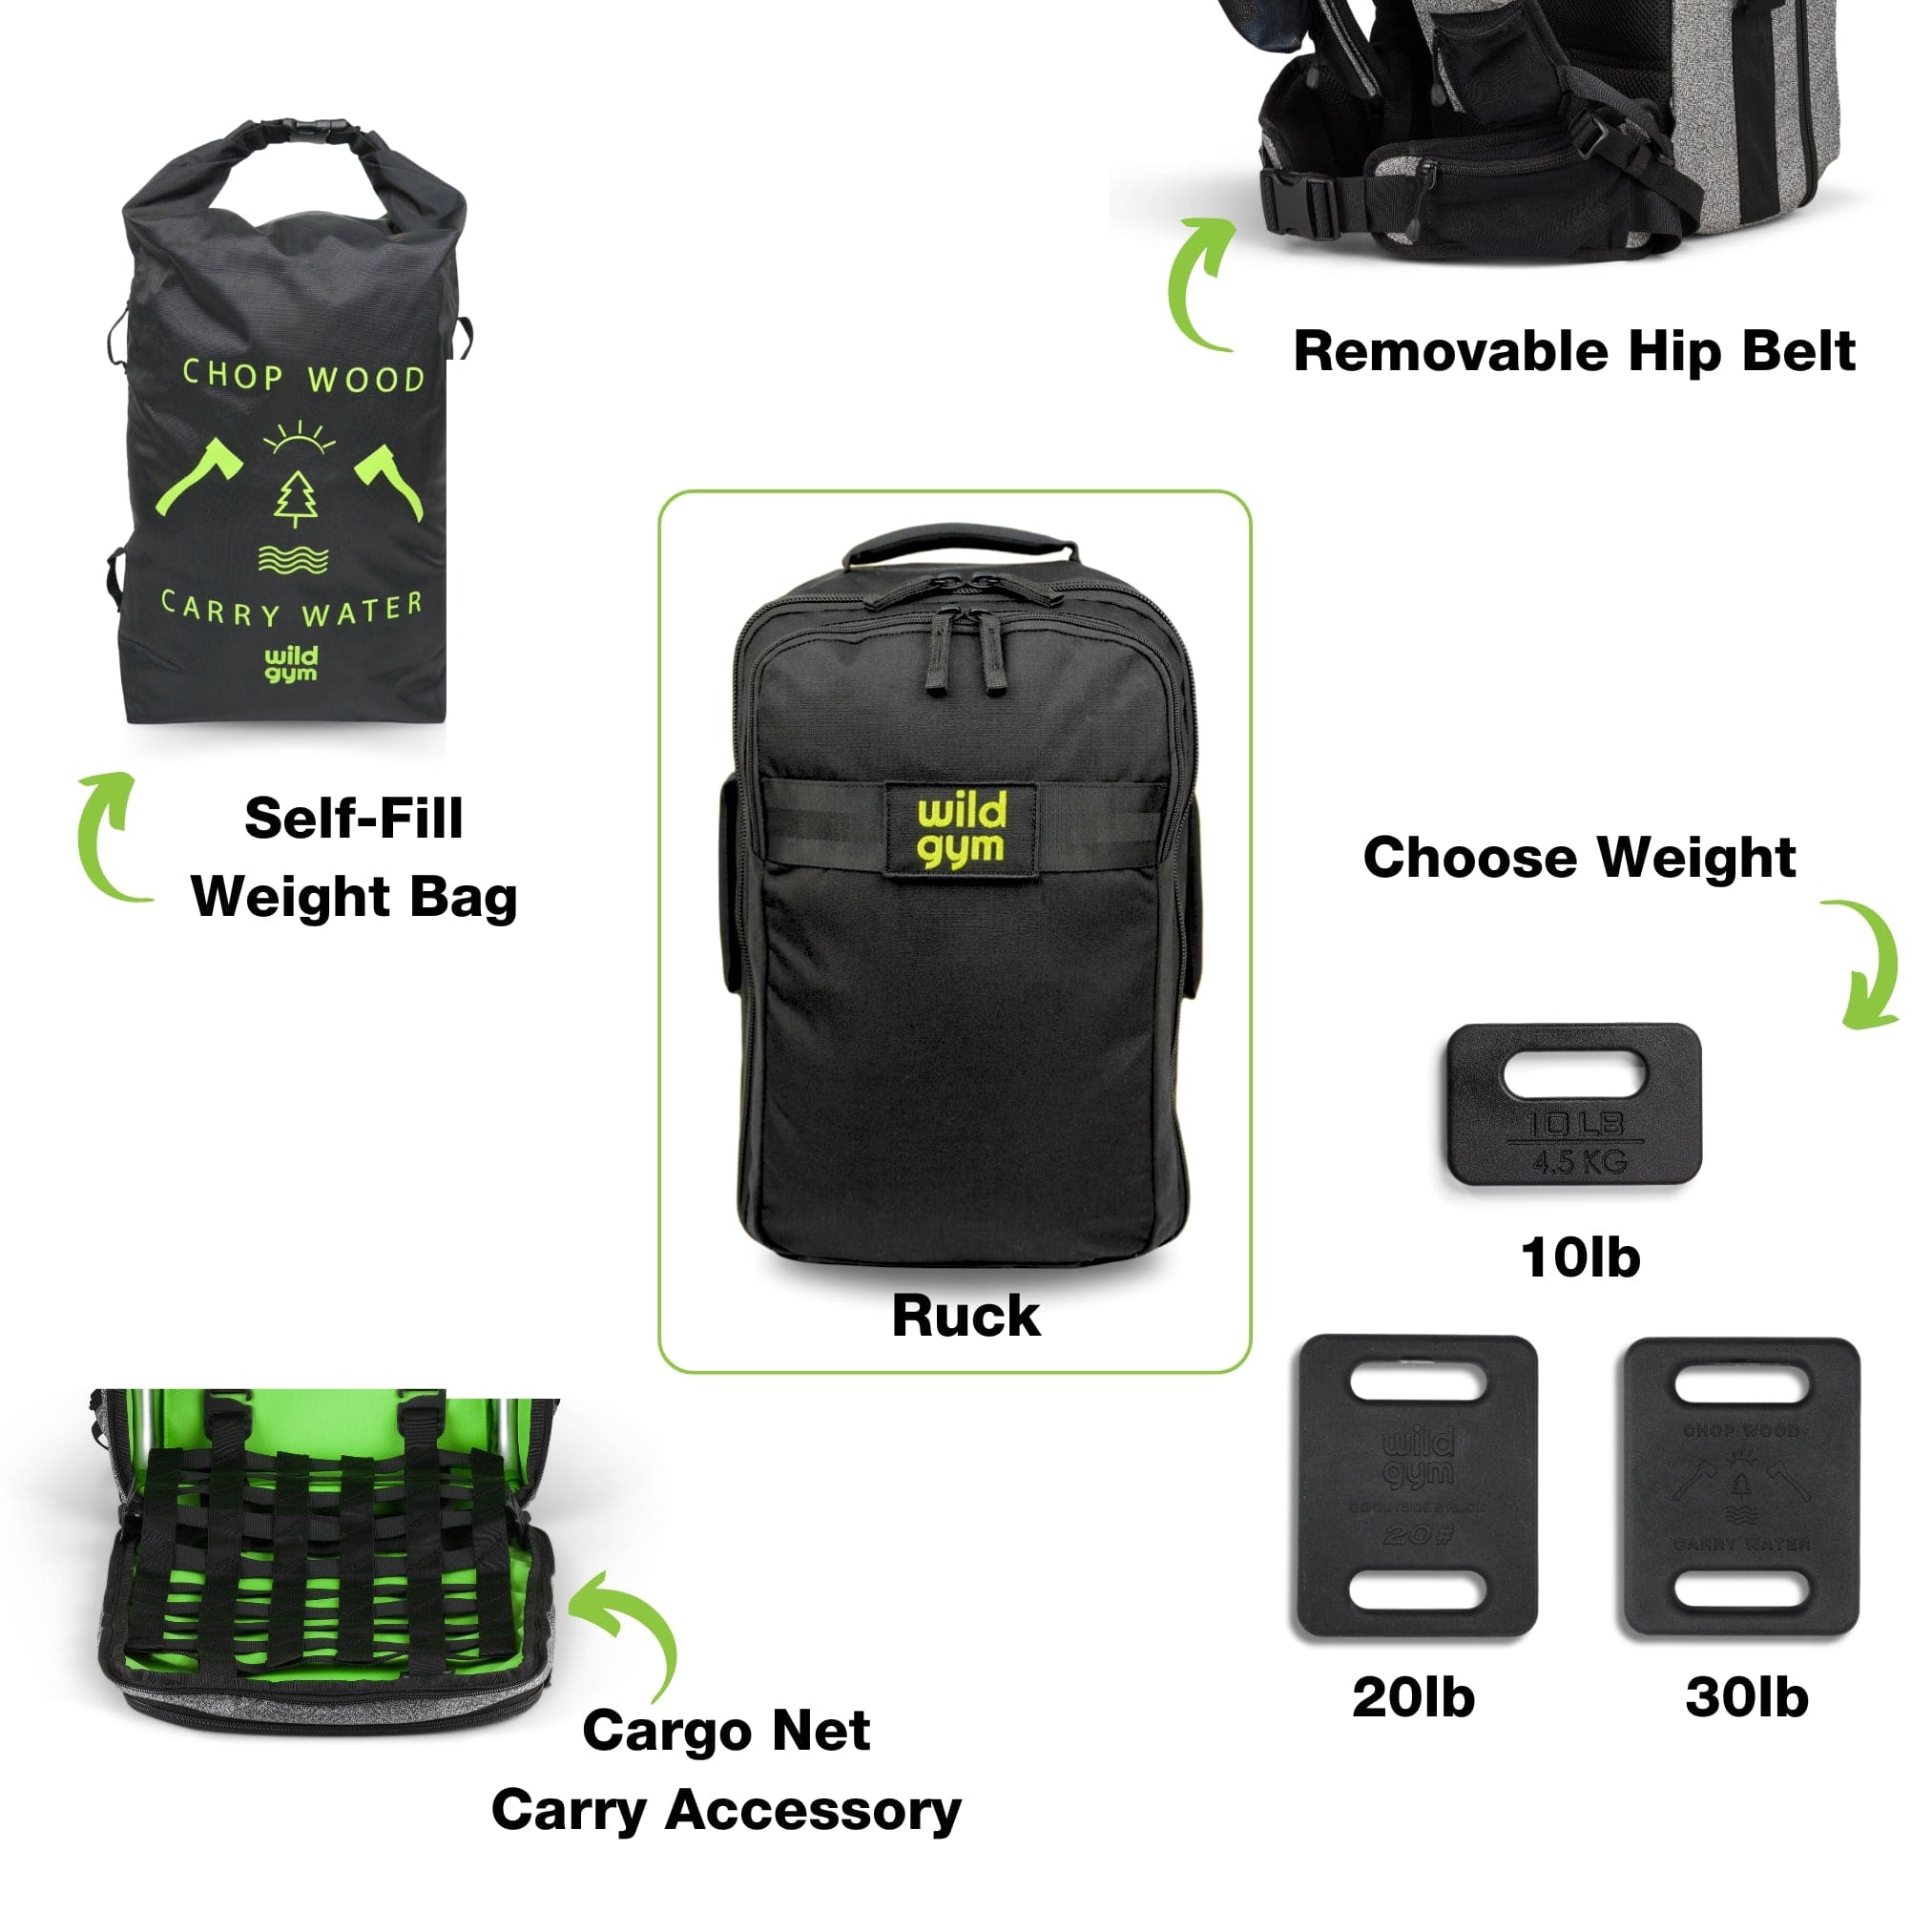 Complete Ruck System